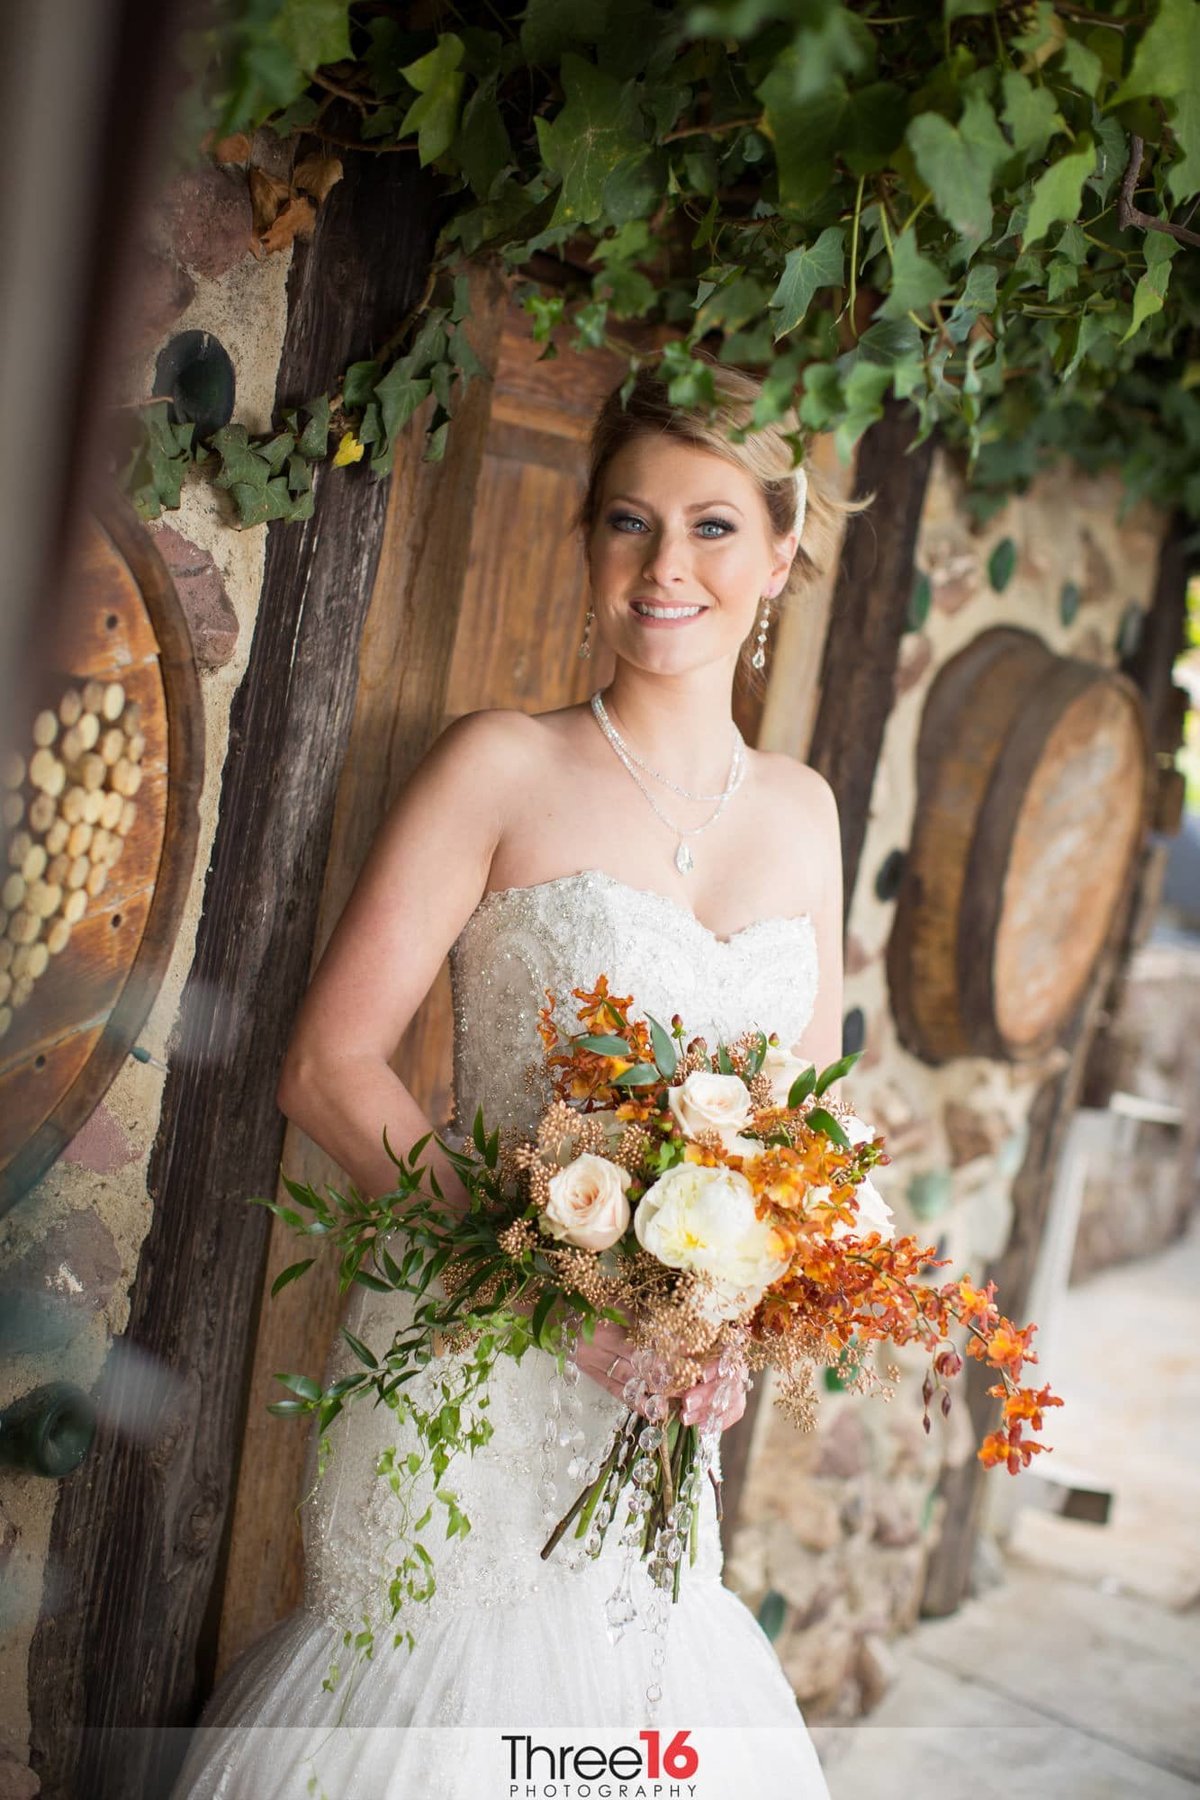 Beautiful Bride poses with her Bouquet of Flowers